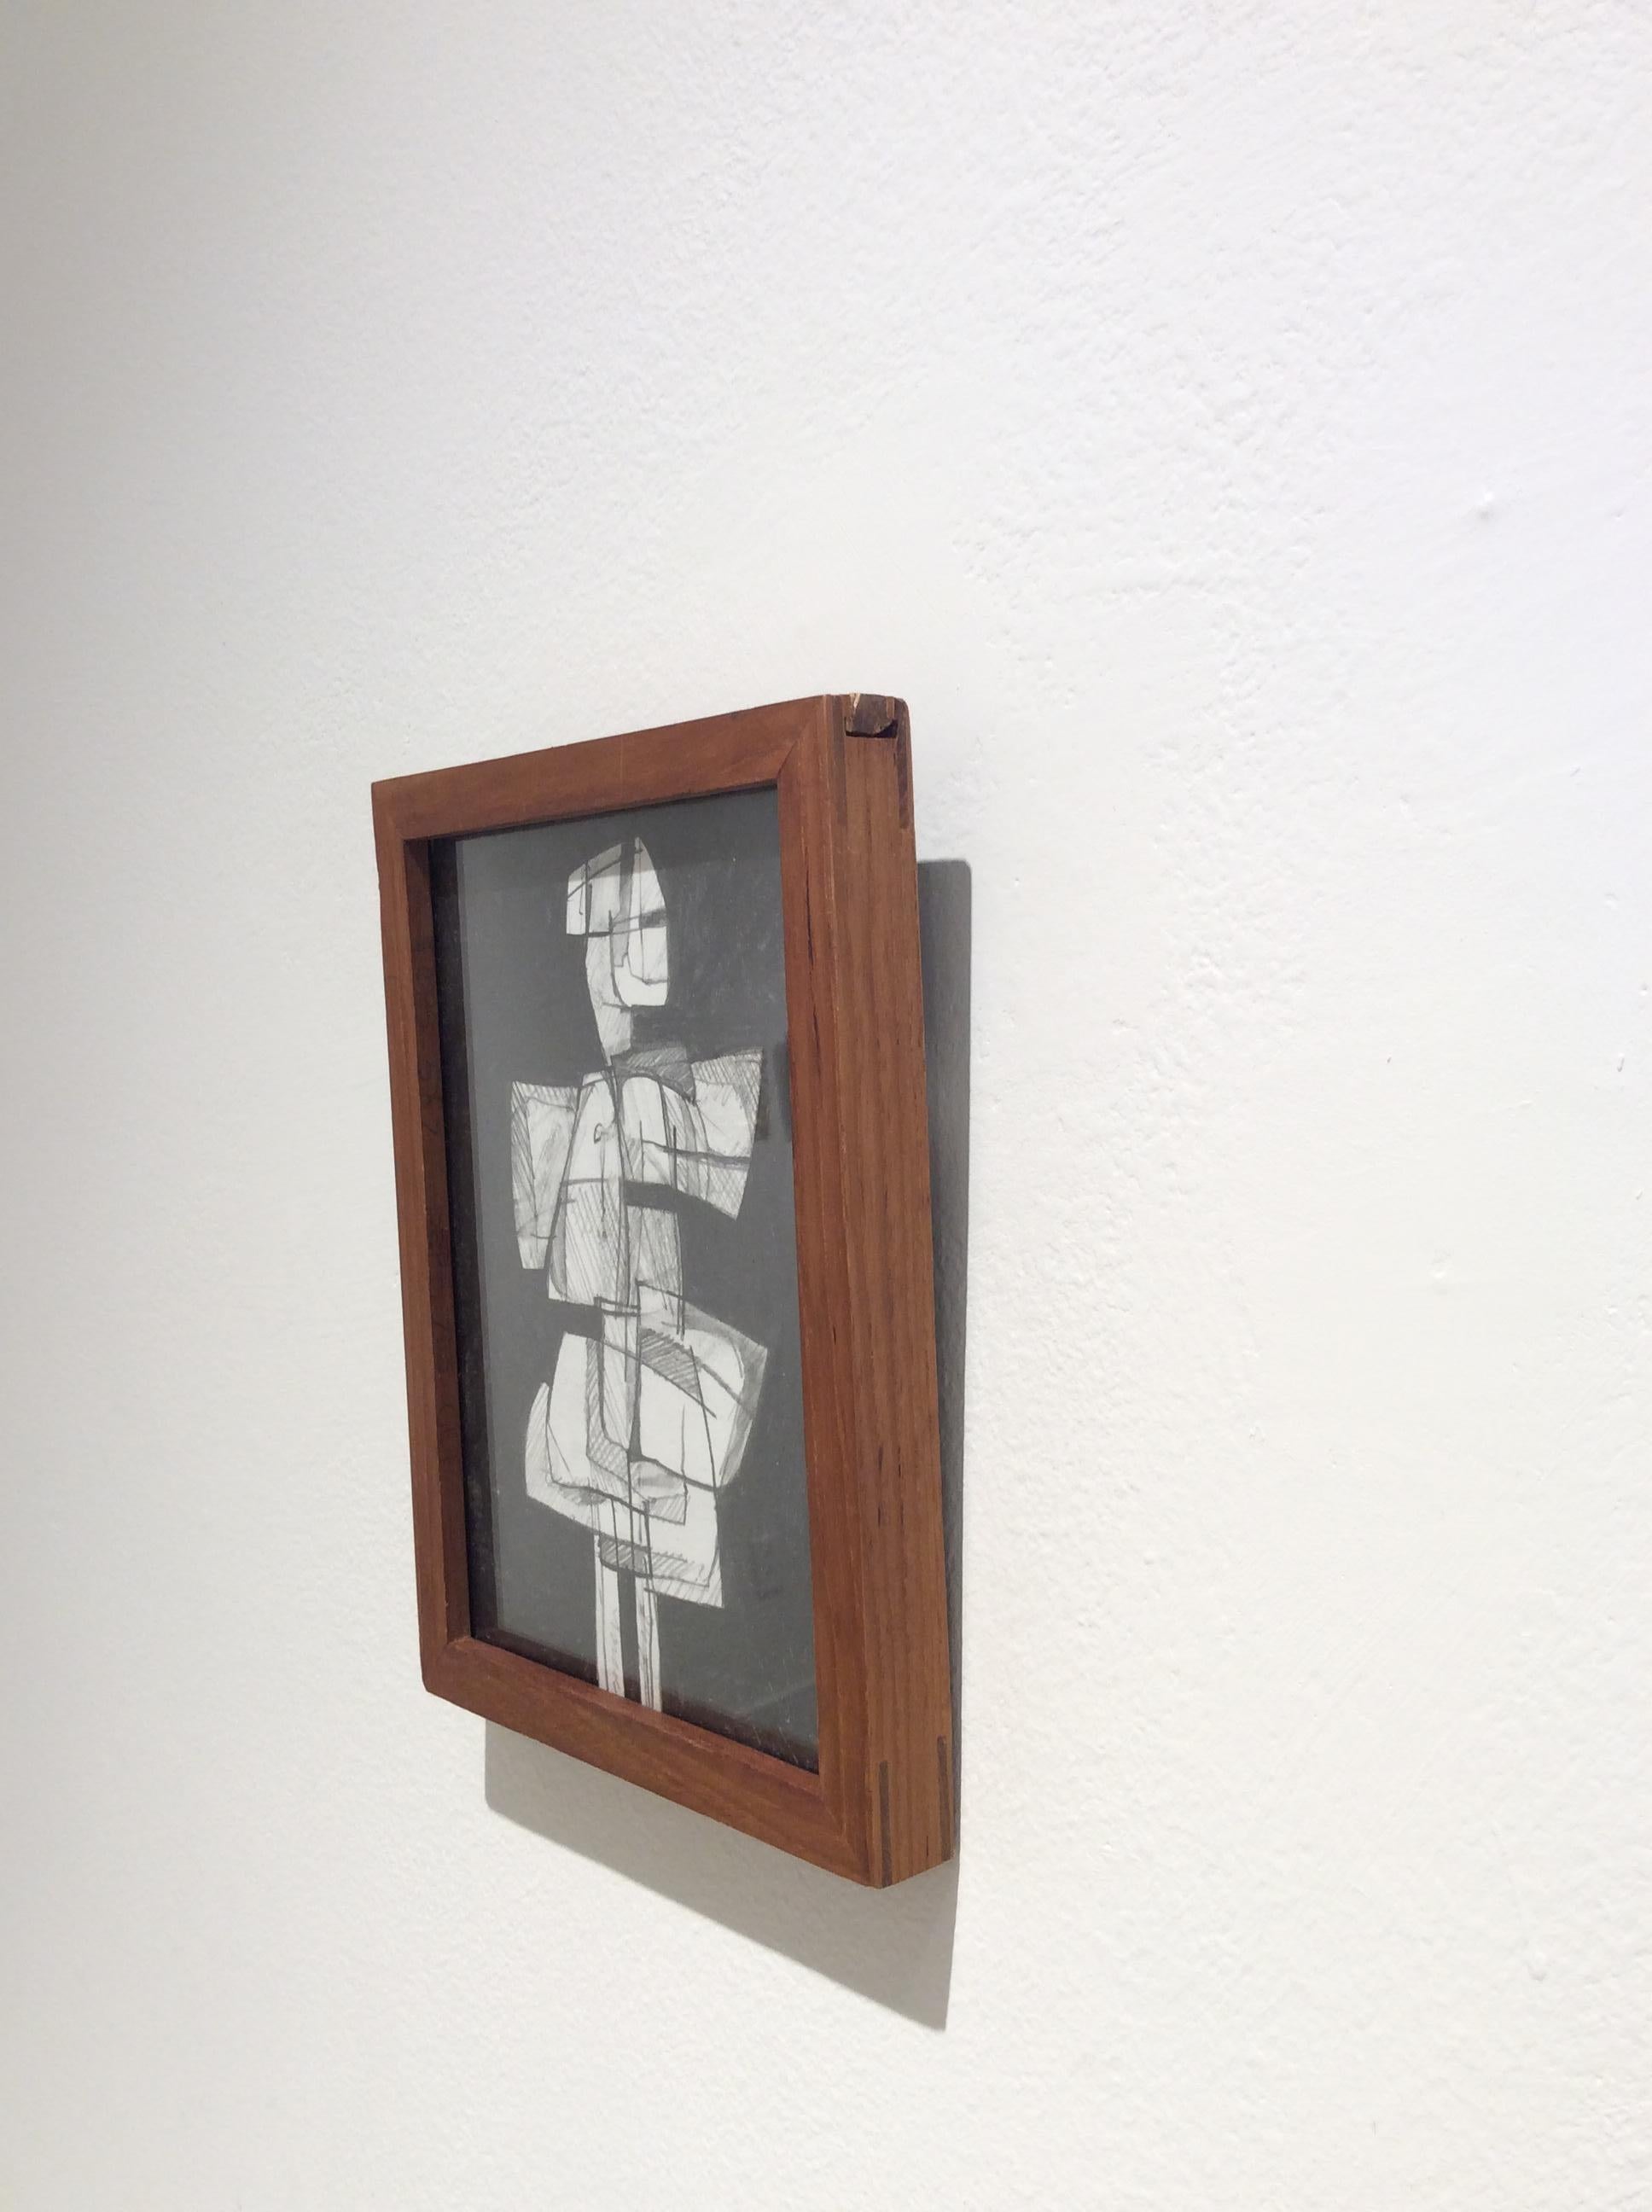 Figurative abstract cubist style drawing of a standing figure in a vintage brown wooden frame
“Infanta XLIX” by Hudson Valley artist, David Dew Bruner, made in 2018
Graphite on paper in an antique black frame
approximately 8 x 6 inches
Ready to hang